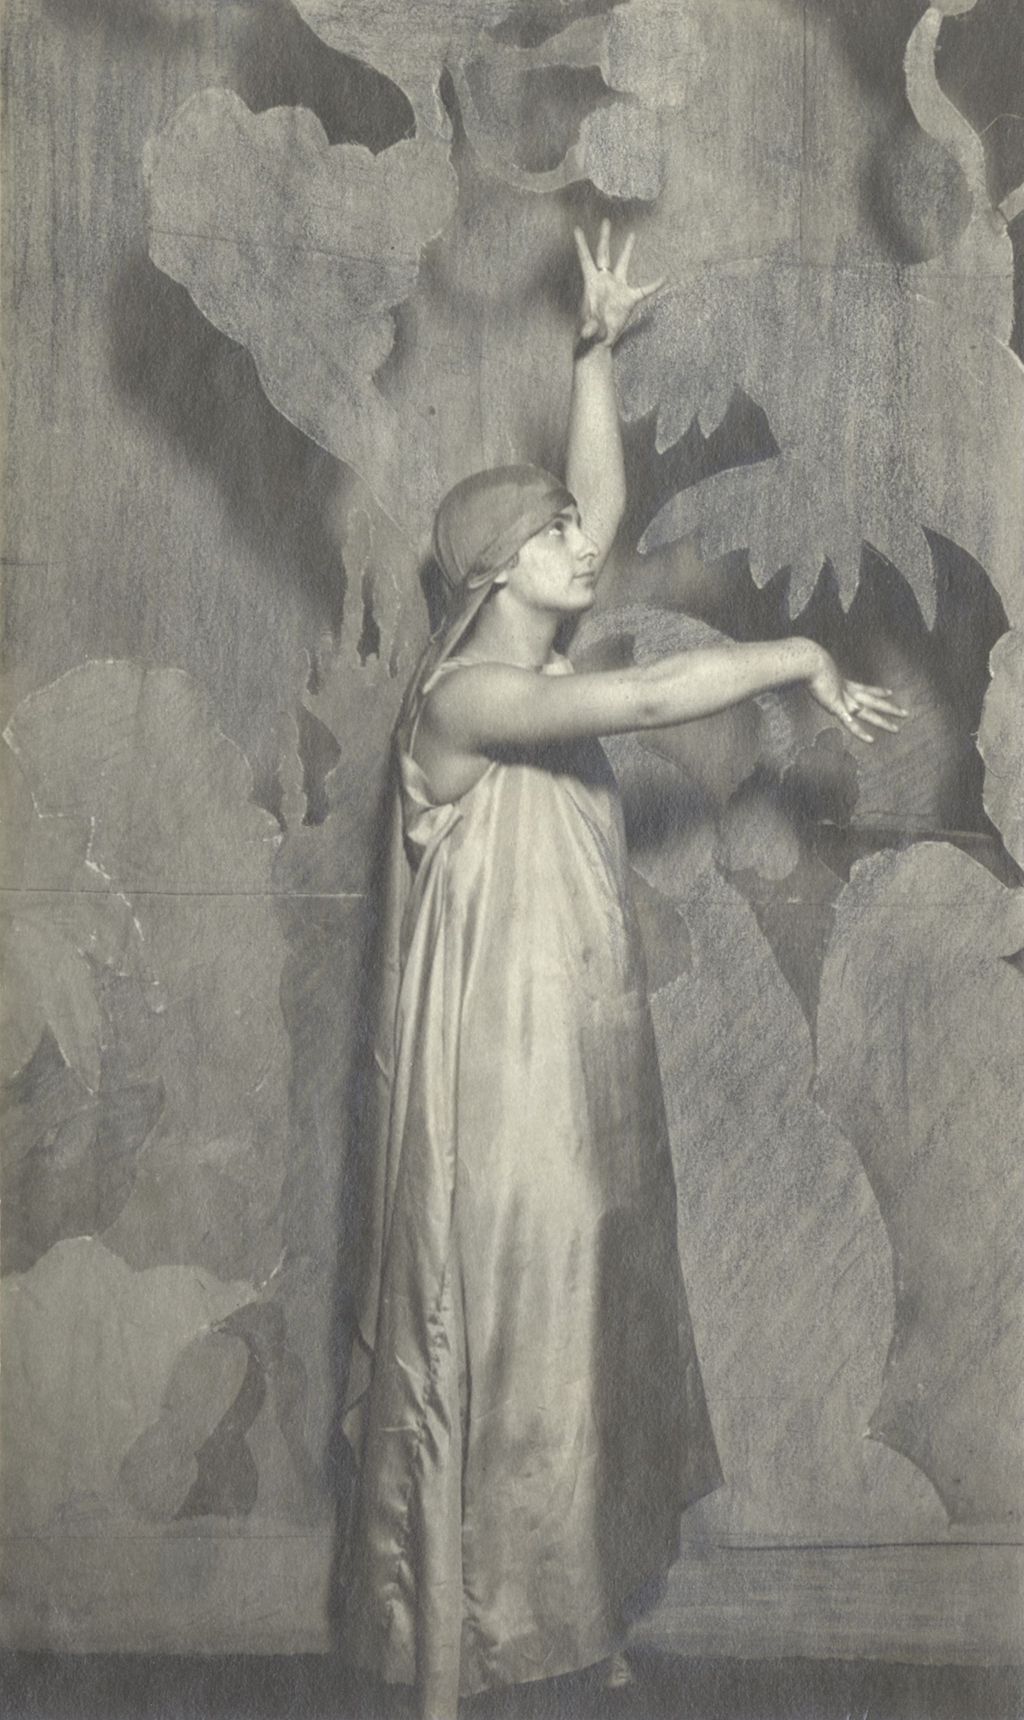 The White Witch from Hull-House production of "The Merman's Bride"